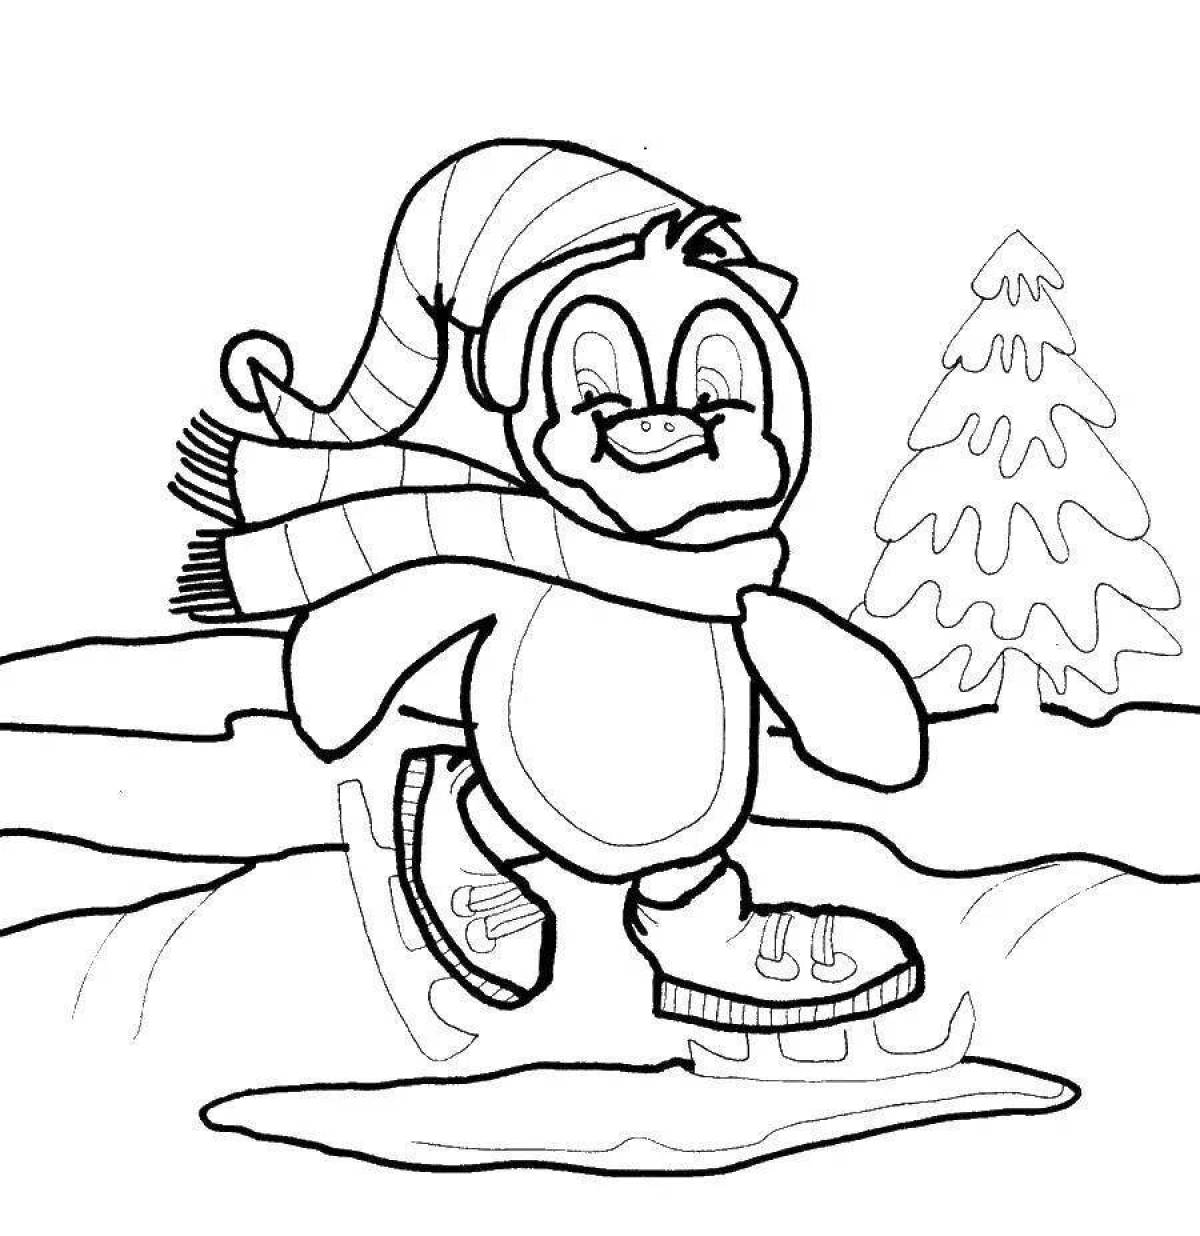 Shimmering thin ice coloring page